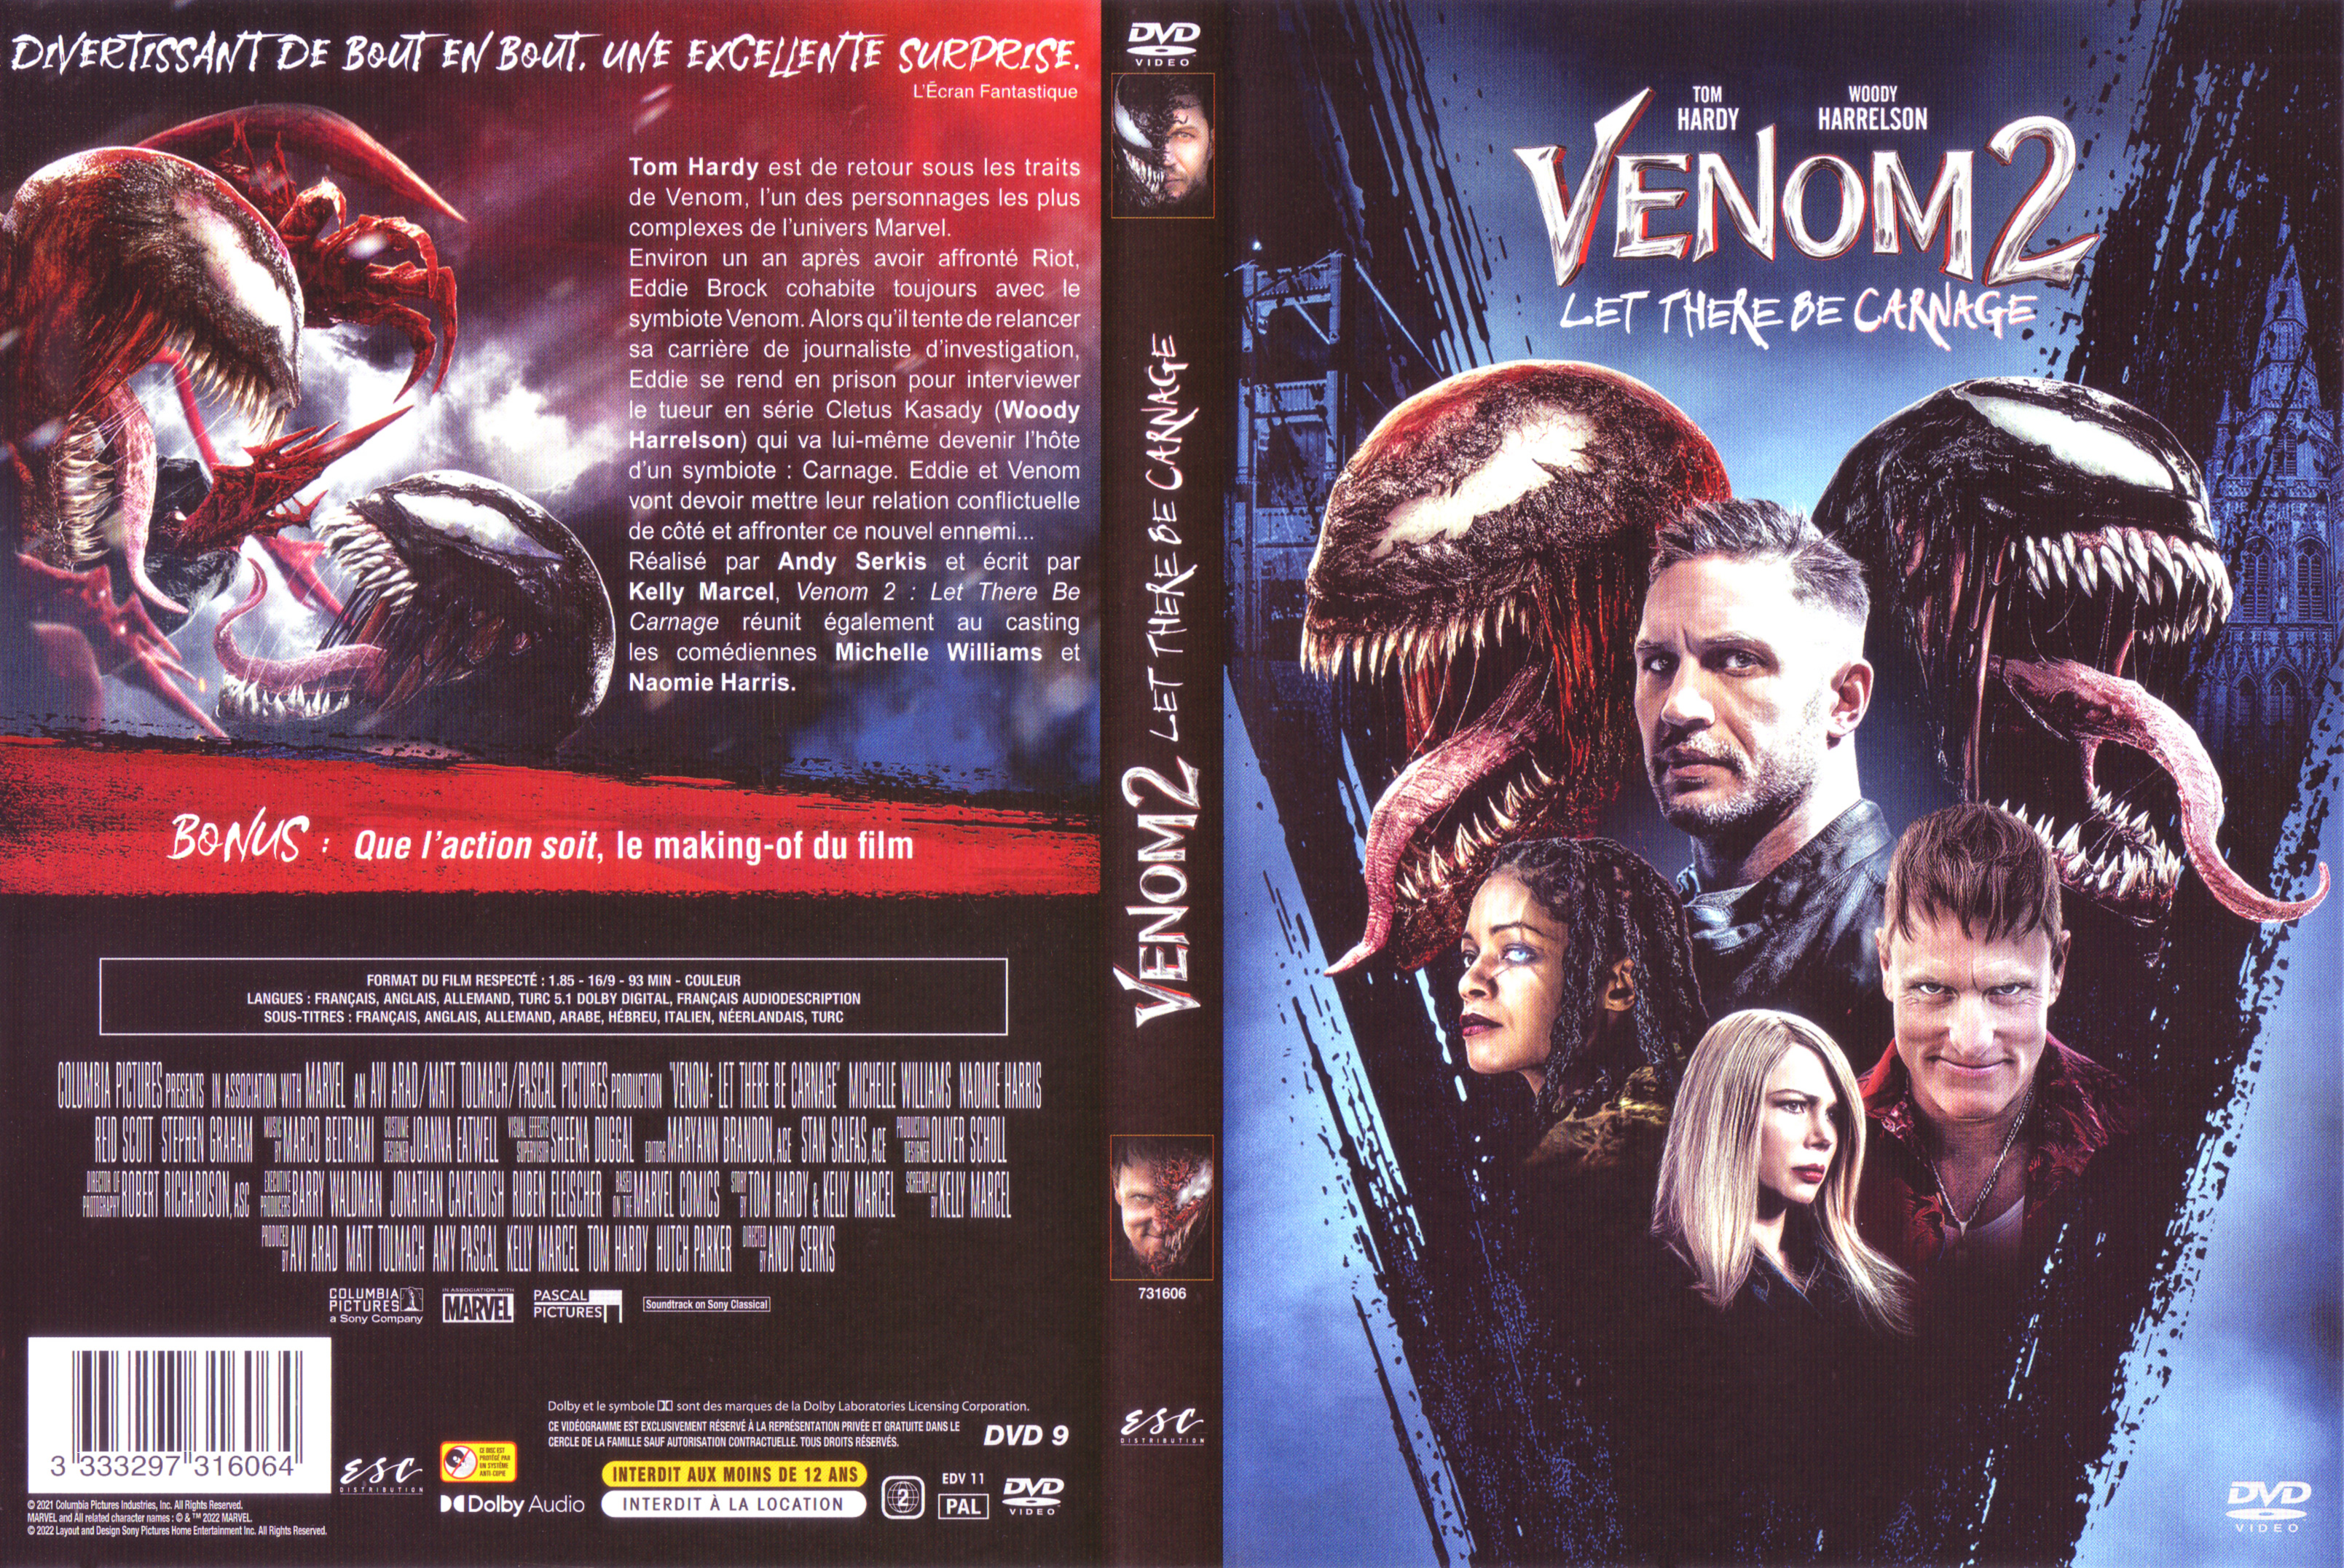 Jaquette DVD Venom 2 Let there be carnage